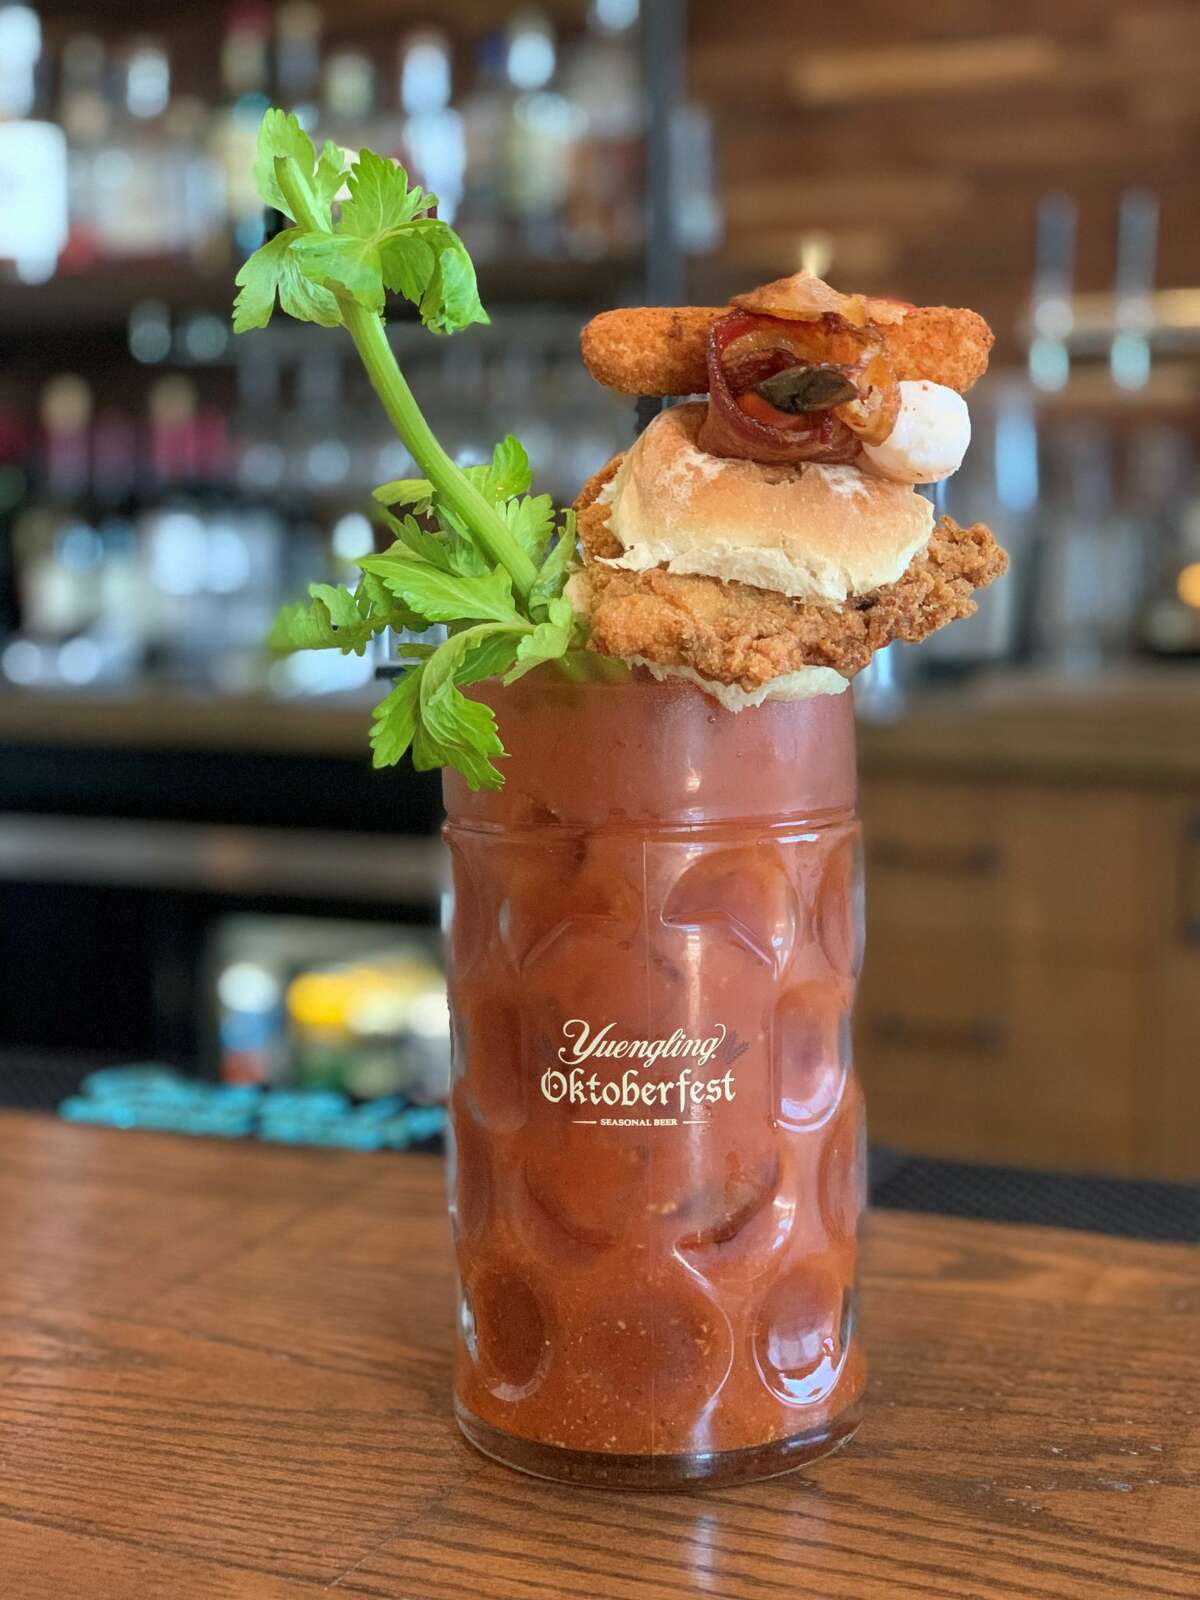 The loaded bloody mary, complete with a small fried chicken sandwich, from The Hideaway in Saratoga Springs.